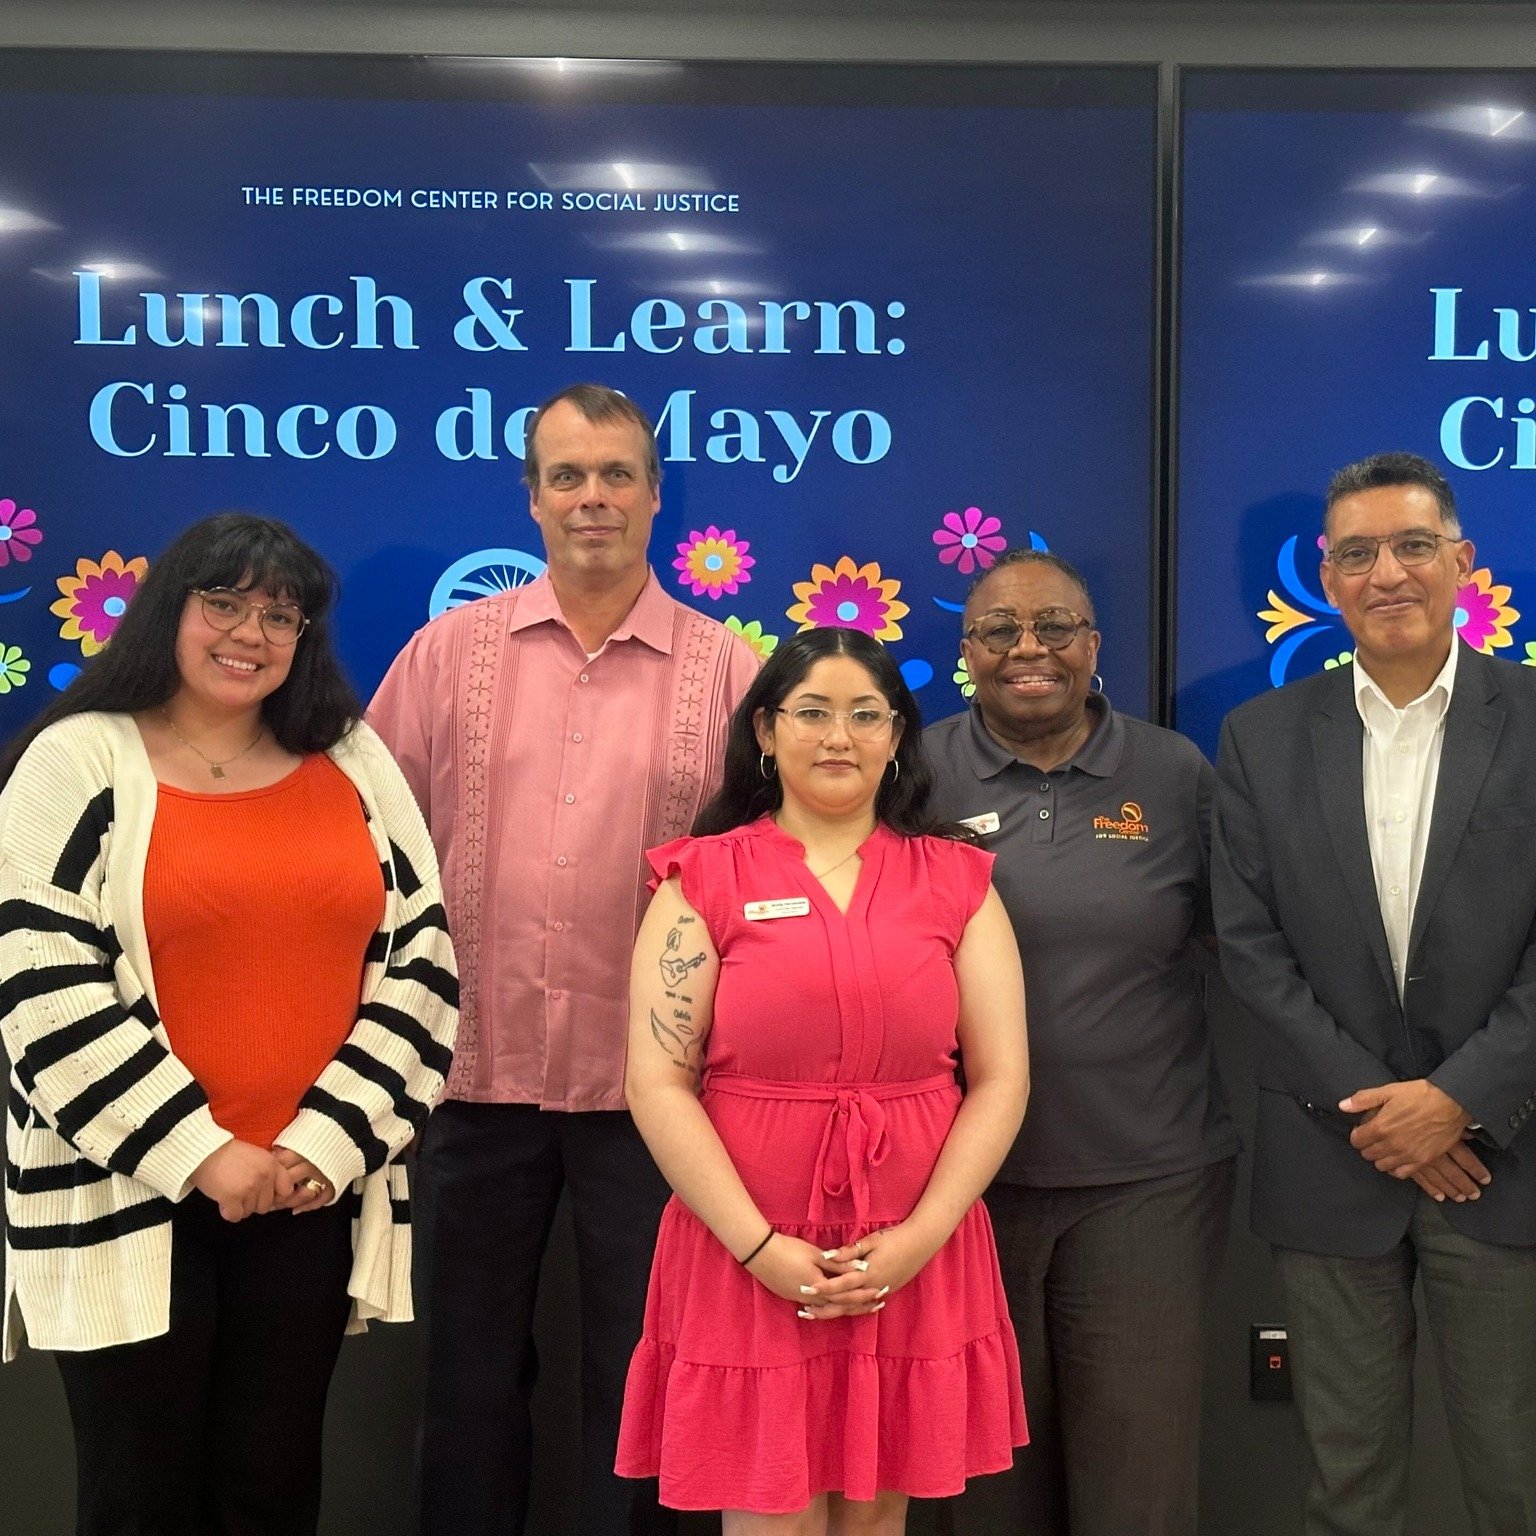 Reflecting on the incredible success of our Cinco de Mayo Lunch and Learn event fills us with immense gratitude and pride. We extend our heartfelt thanks to our esteemed speakers Anai Santibanez from Hispanic Federation, Deputy Consul General Antonio